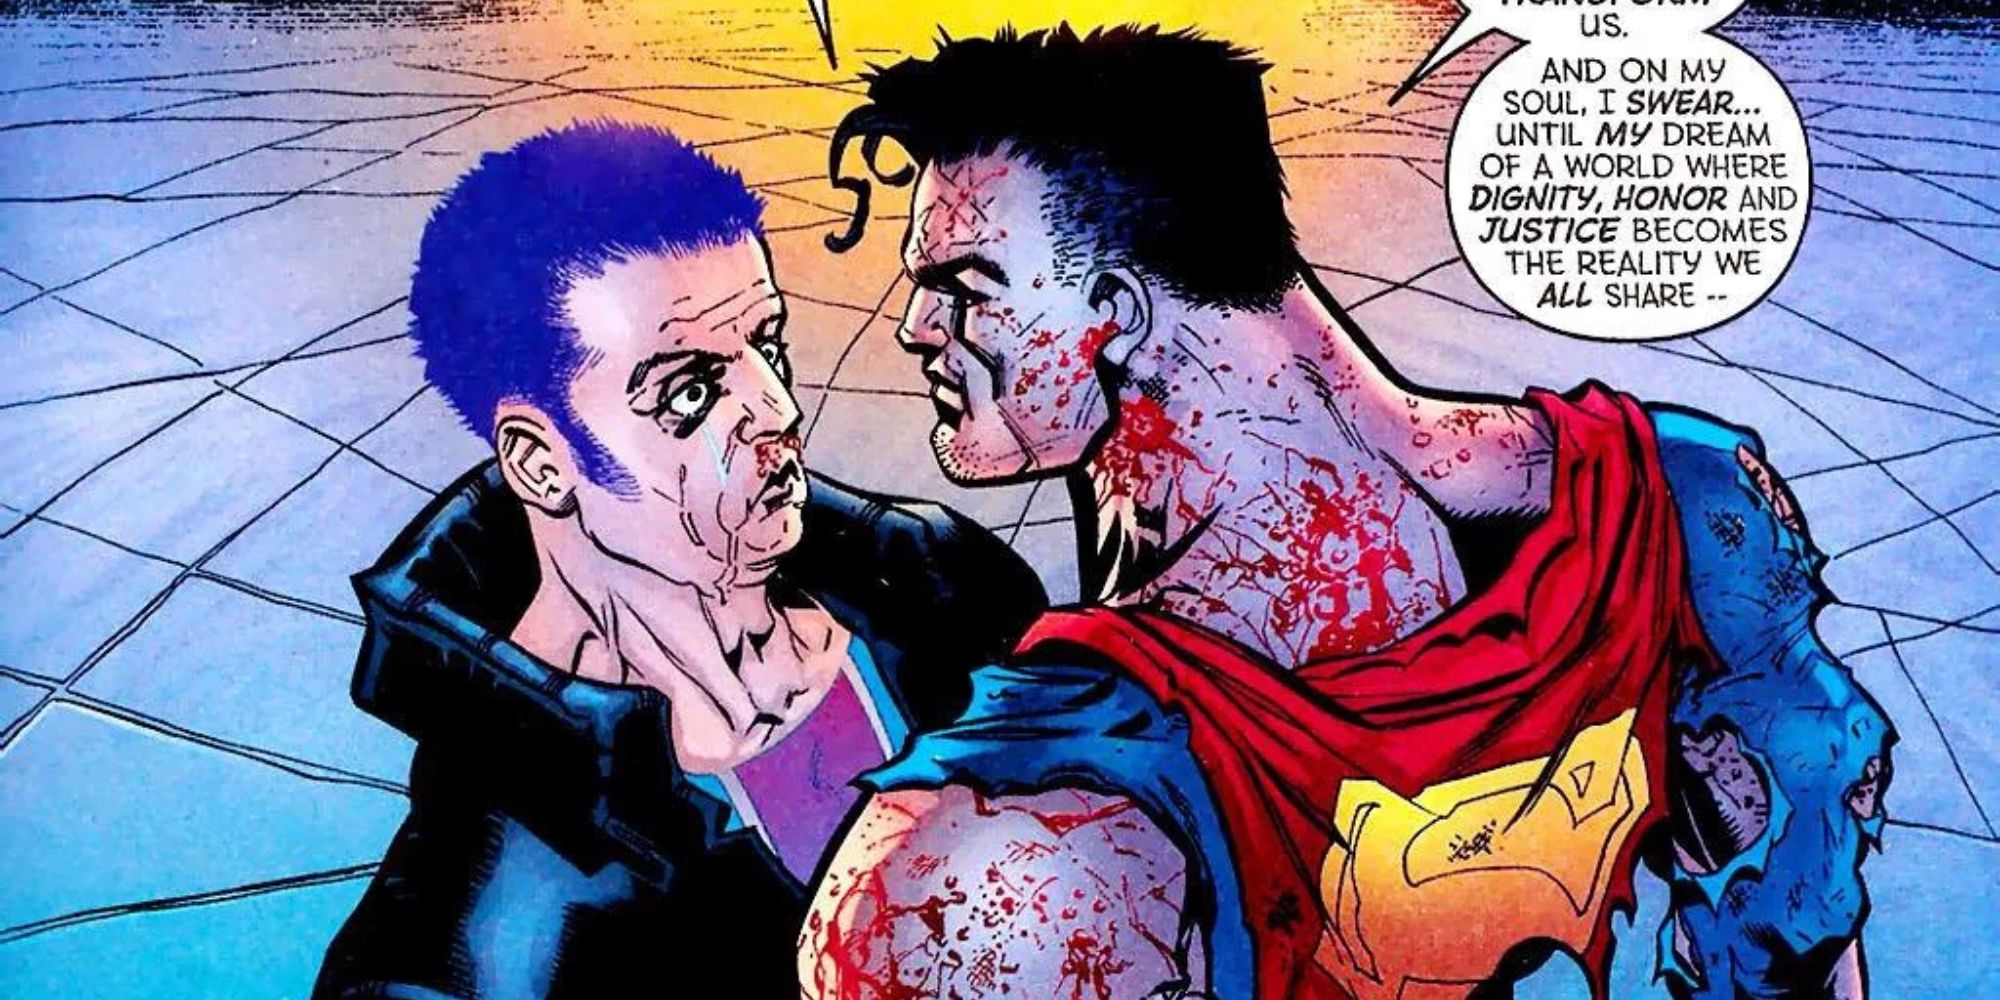 A bloodied Superman confronting a thug in a comic